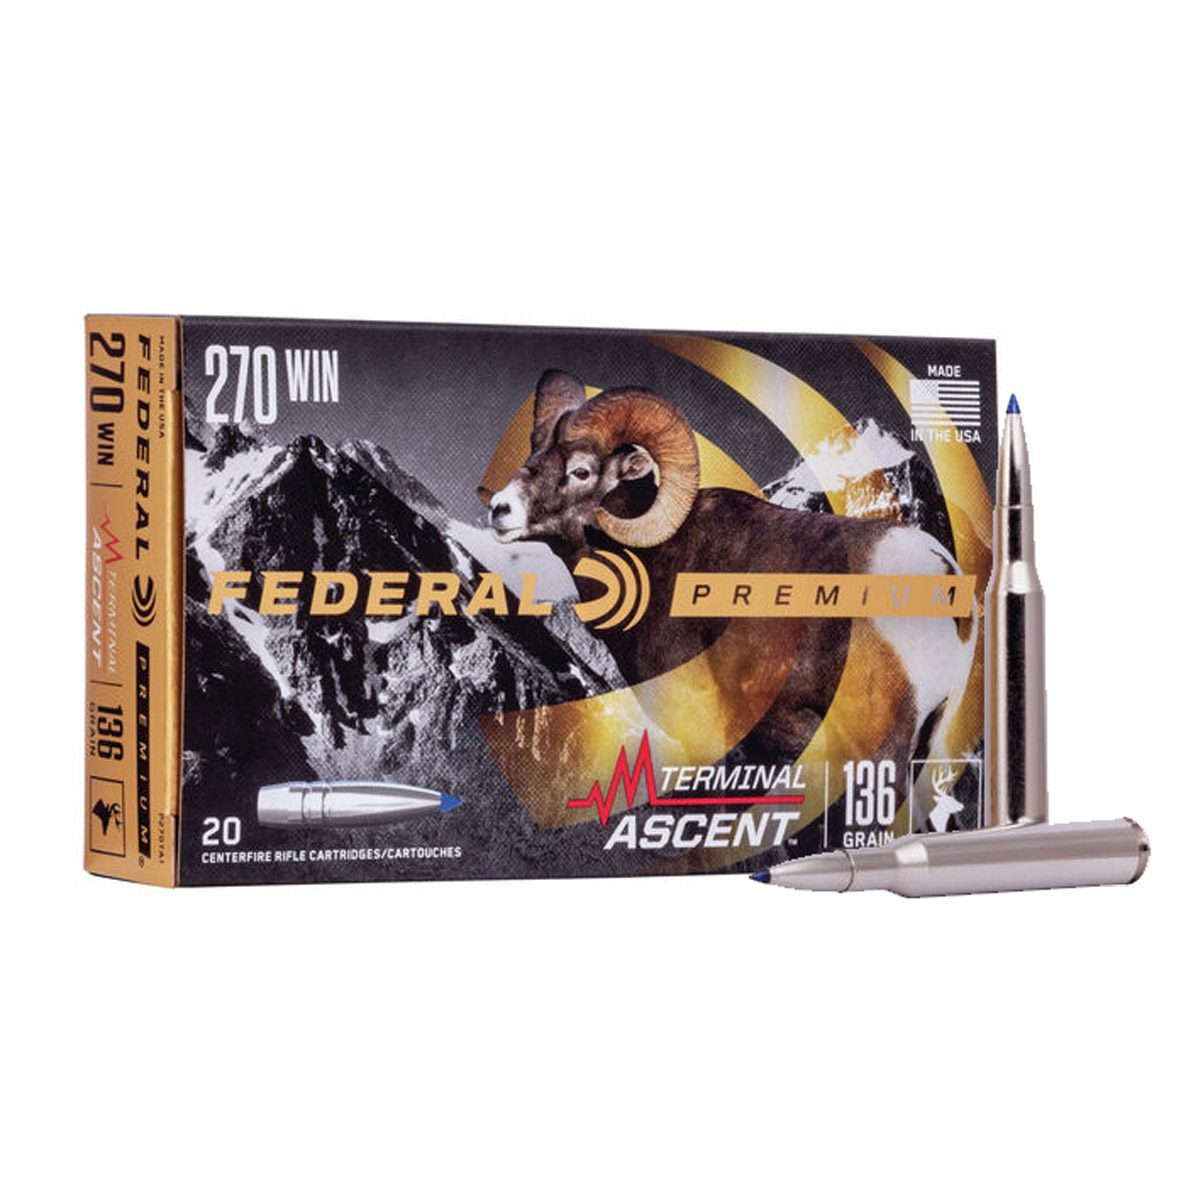 Federal Terminal Ascent 270 Win. 136 gr. – 20 Rounds